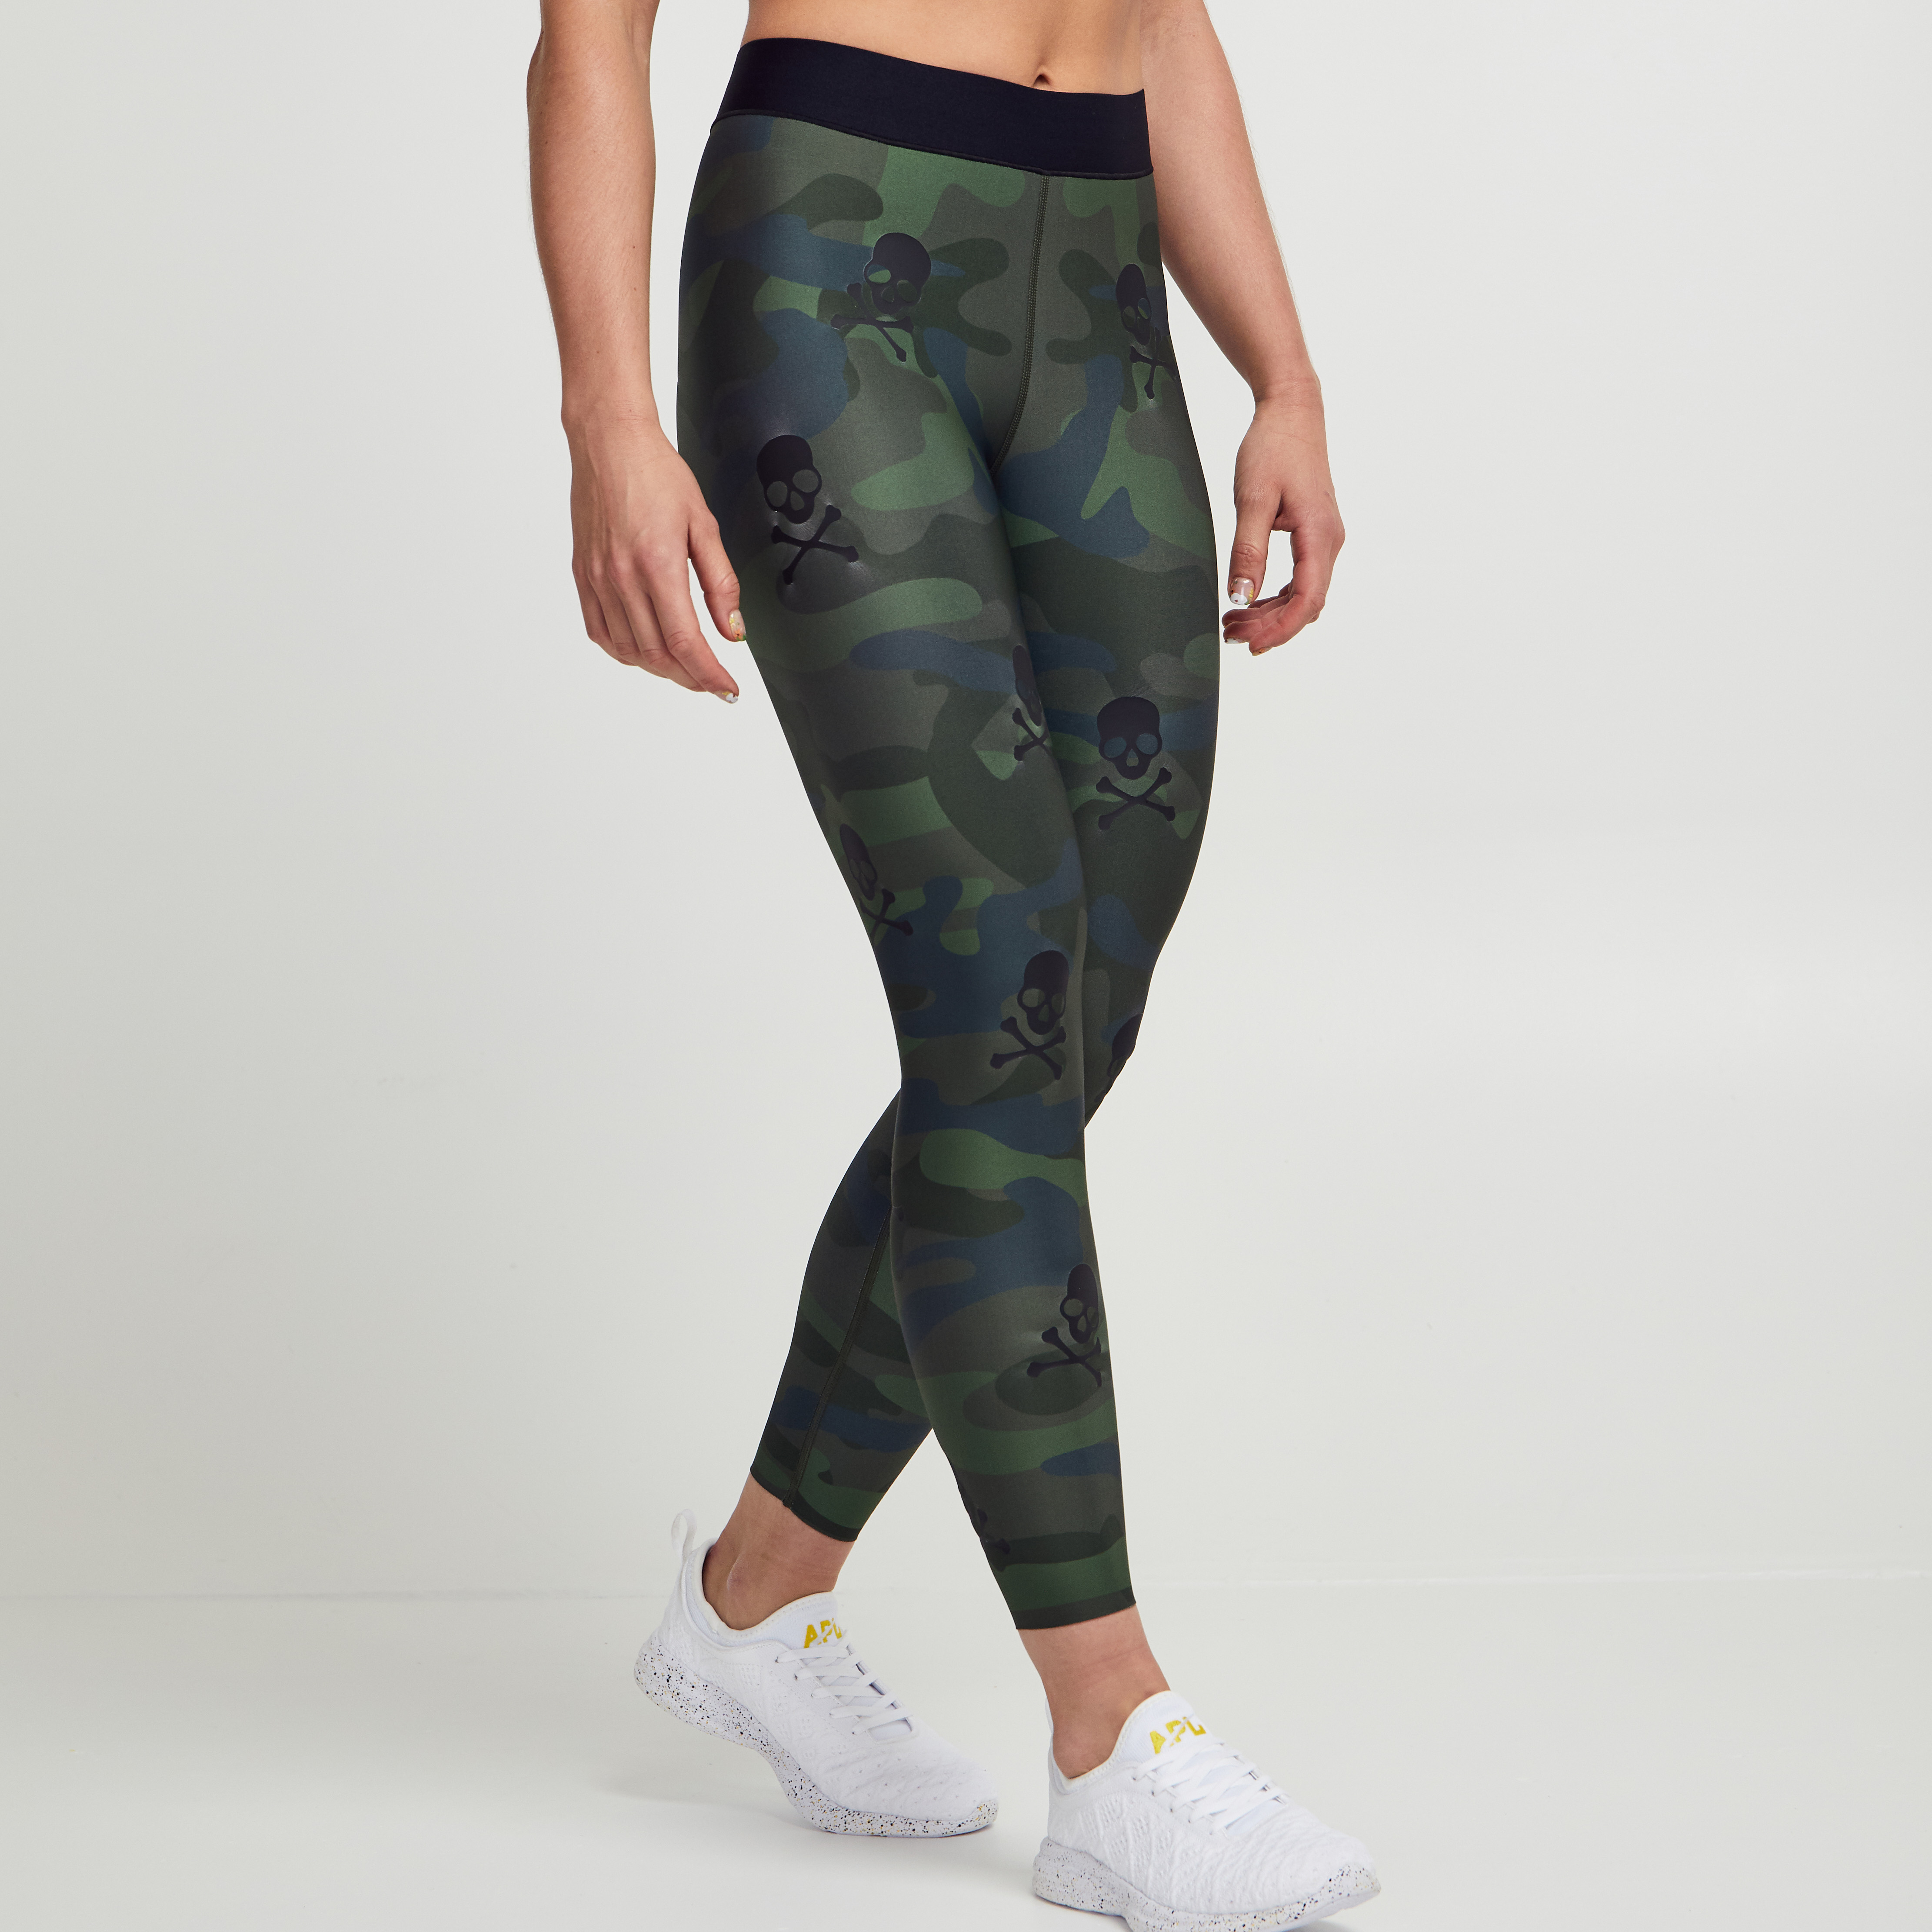 SoulCycle x Ultracor Army Green Camo Legging - SoulCycle Shop